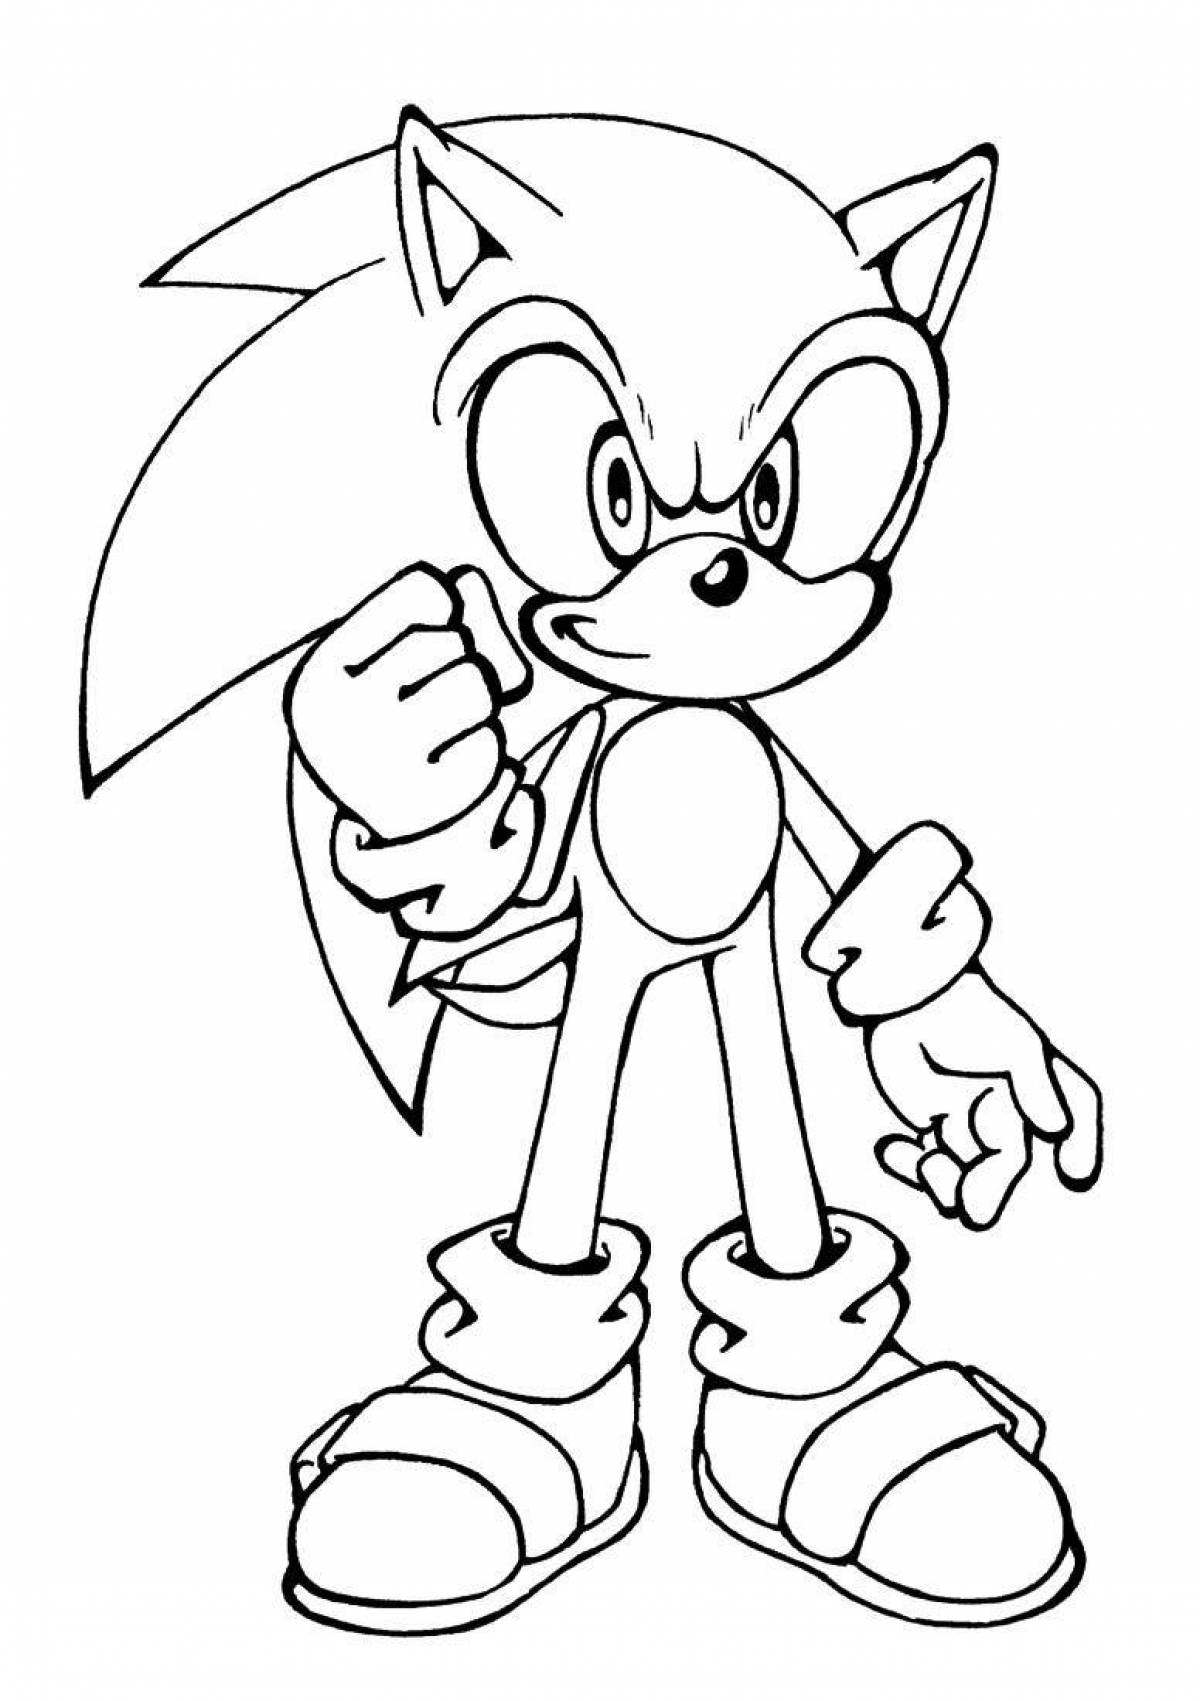 Great golden sonic coloring book